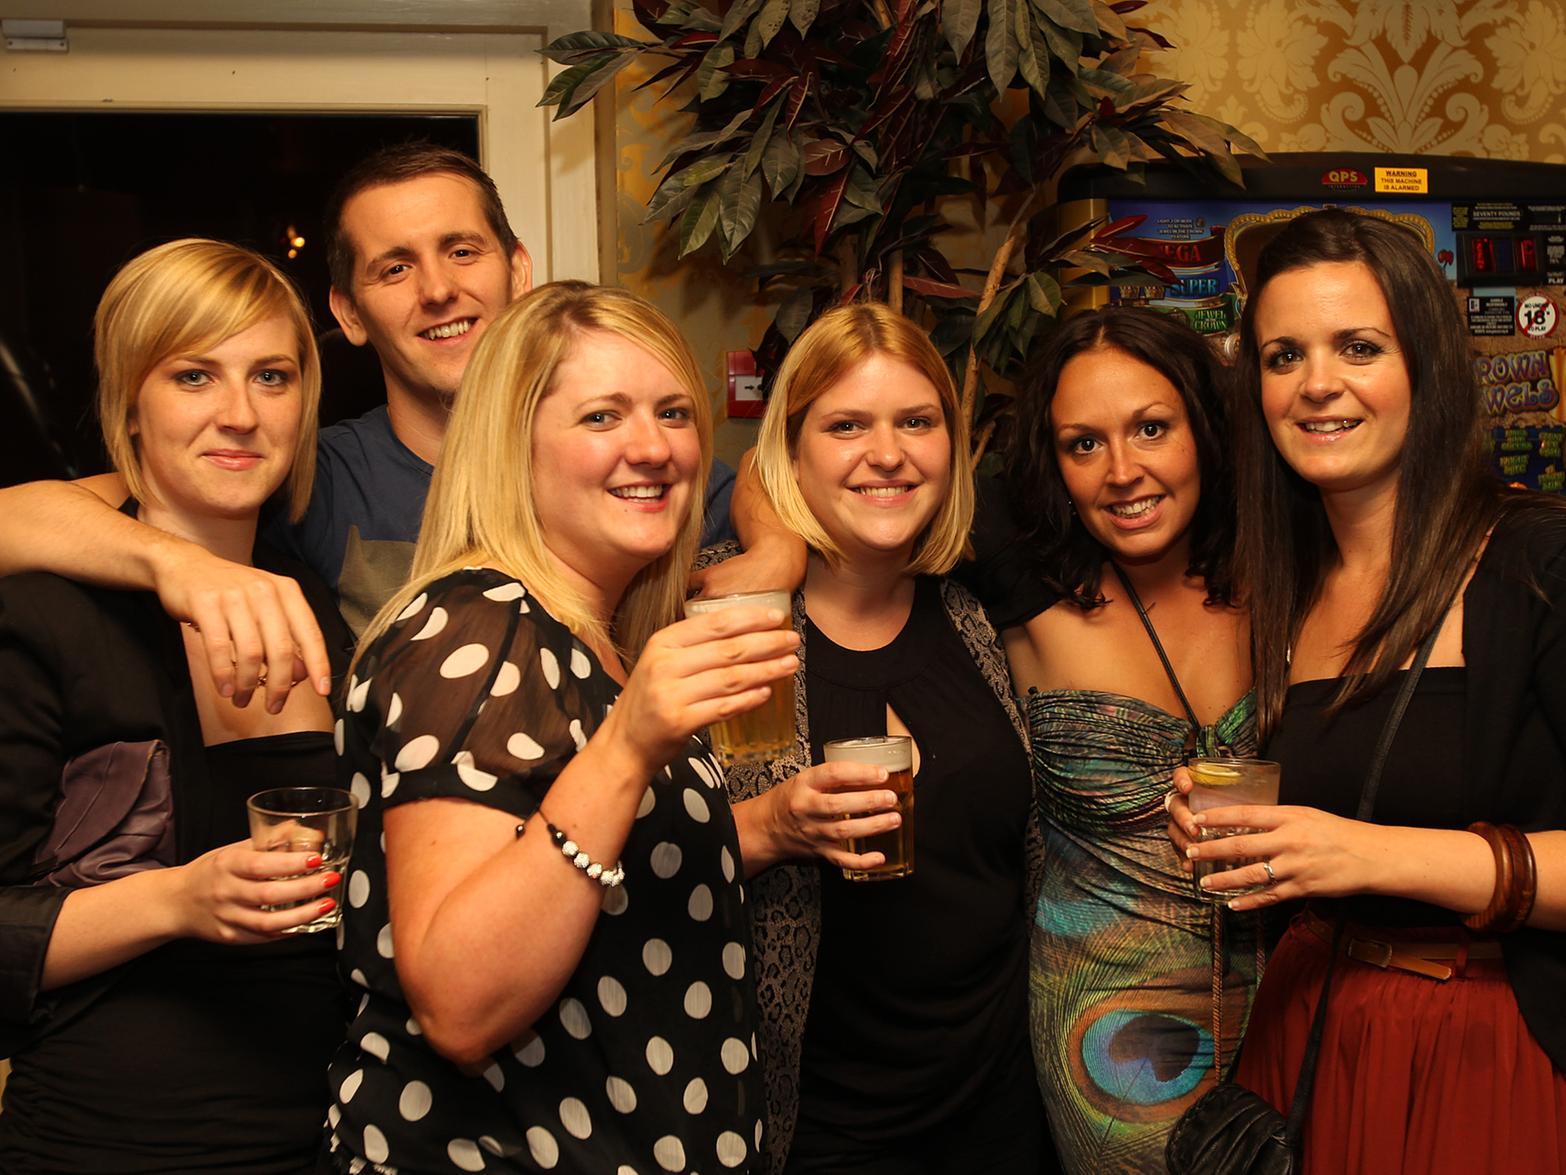 Fran, John, Laura, Siobhan, Belinda and Amy on the town back in 2012